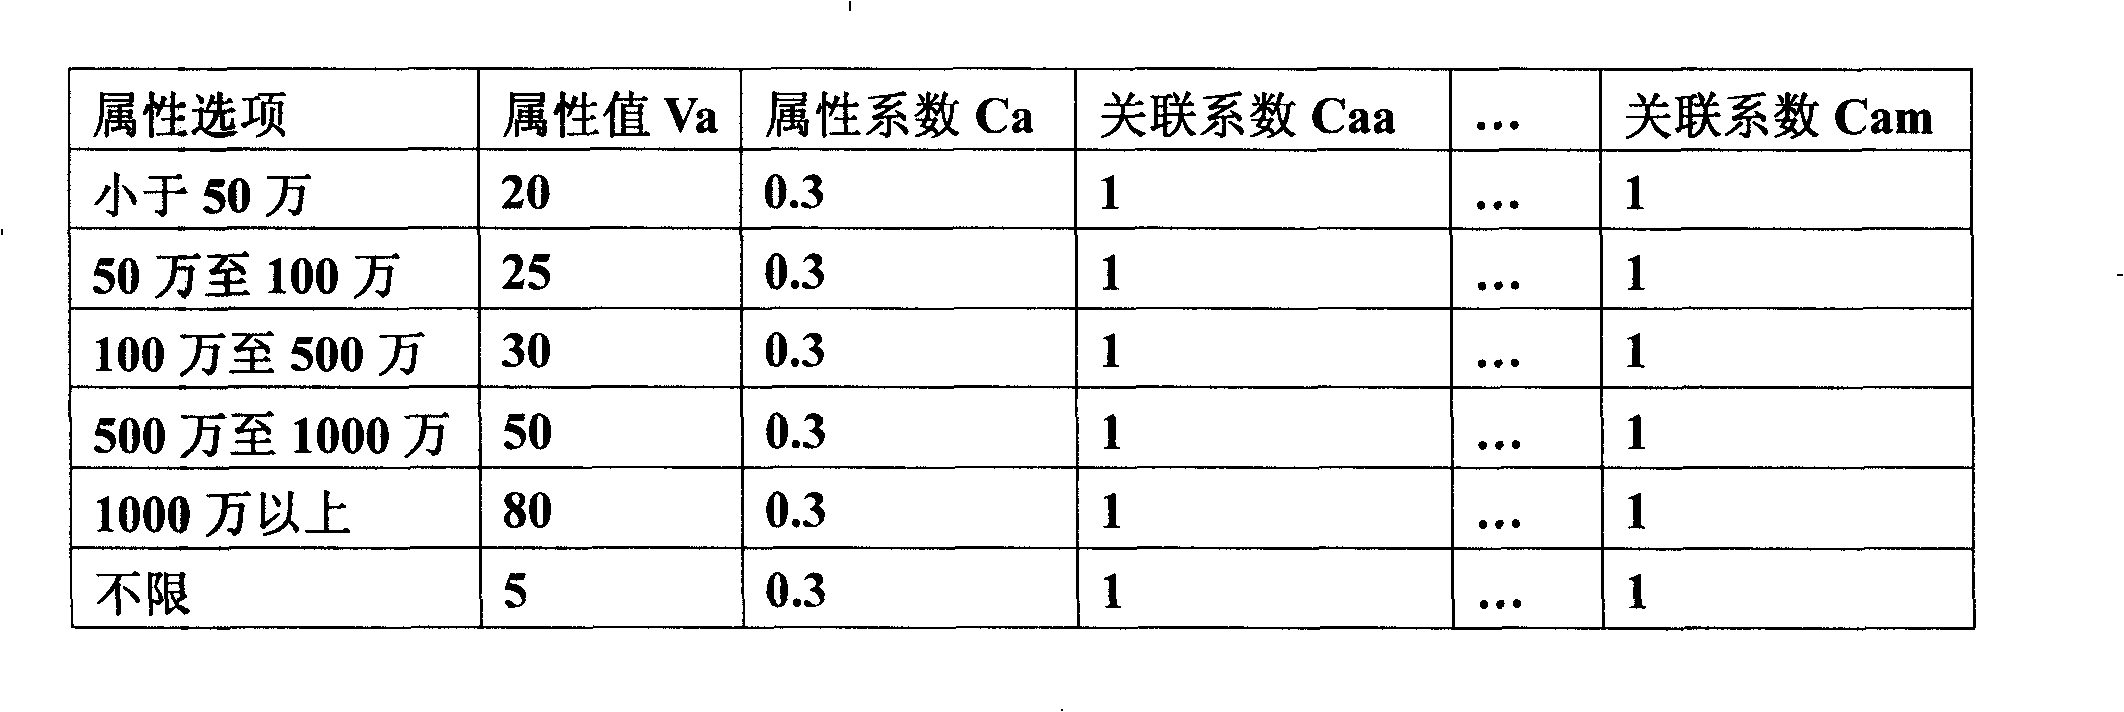 Method for automatically computing network advertisement grade and displaying advertisement